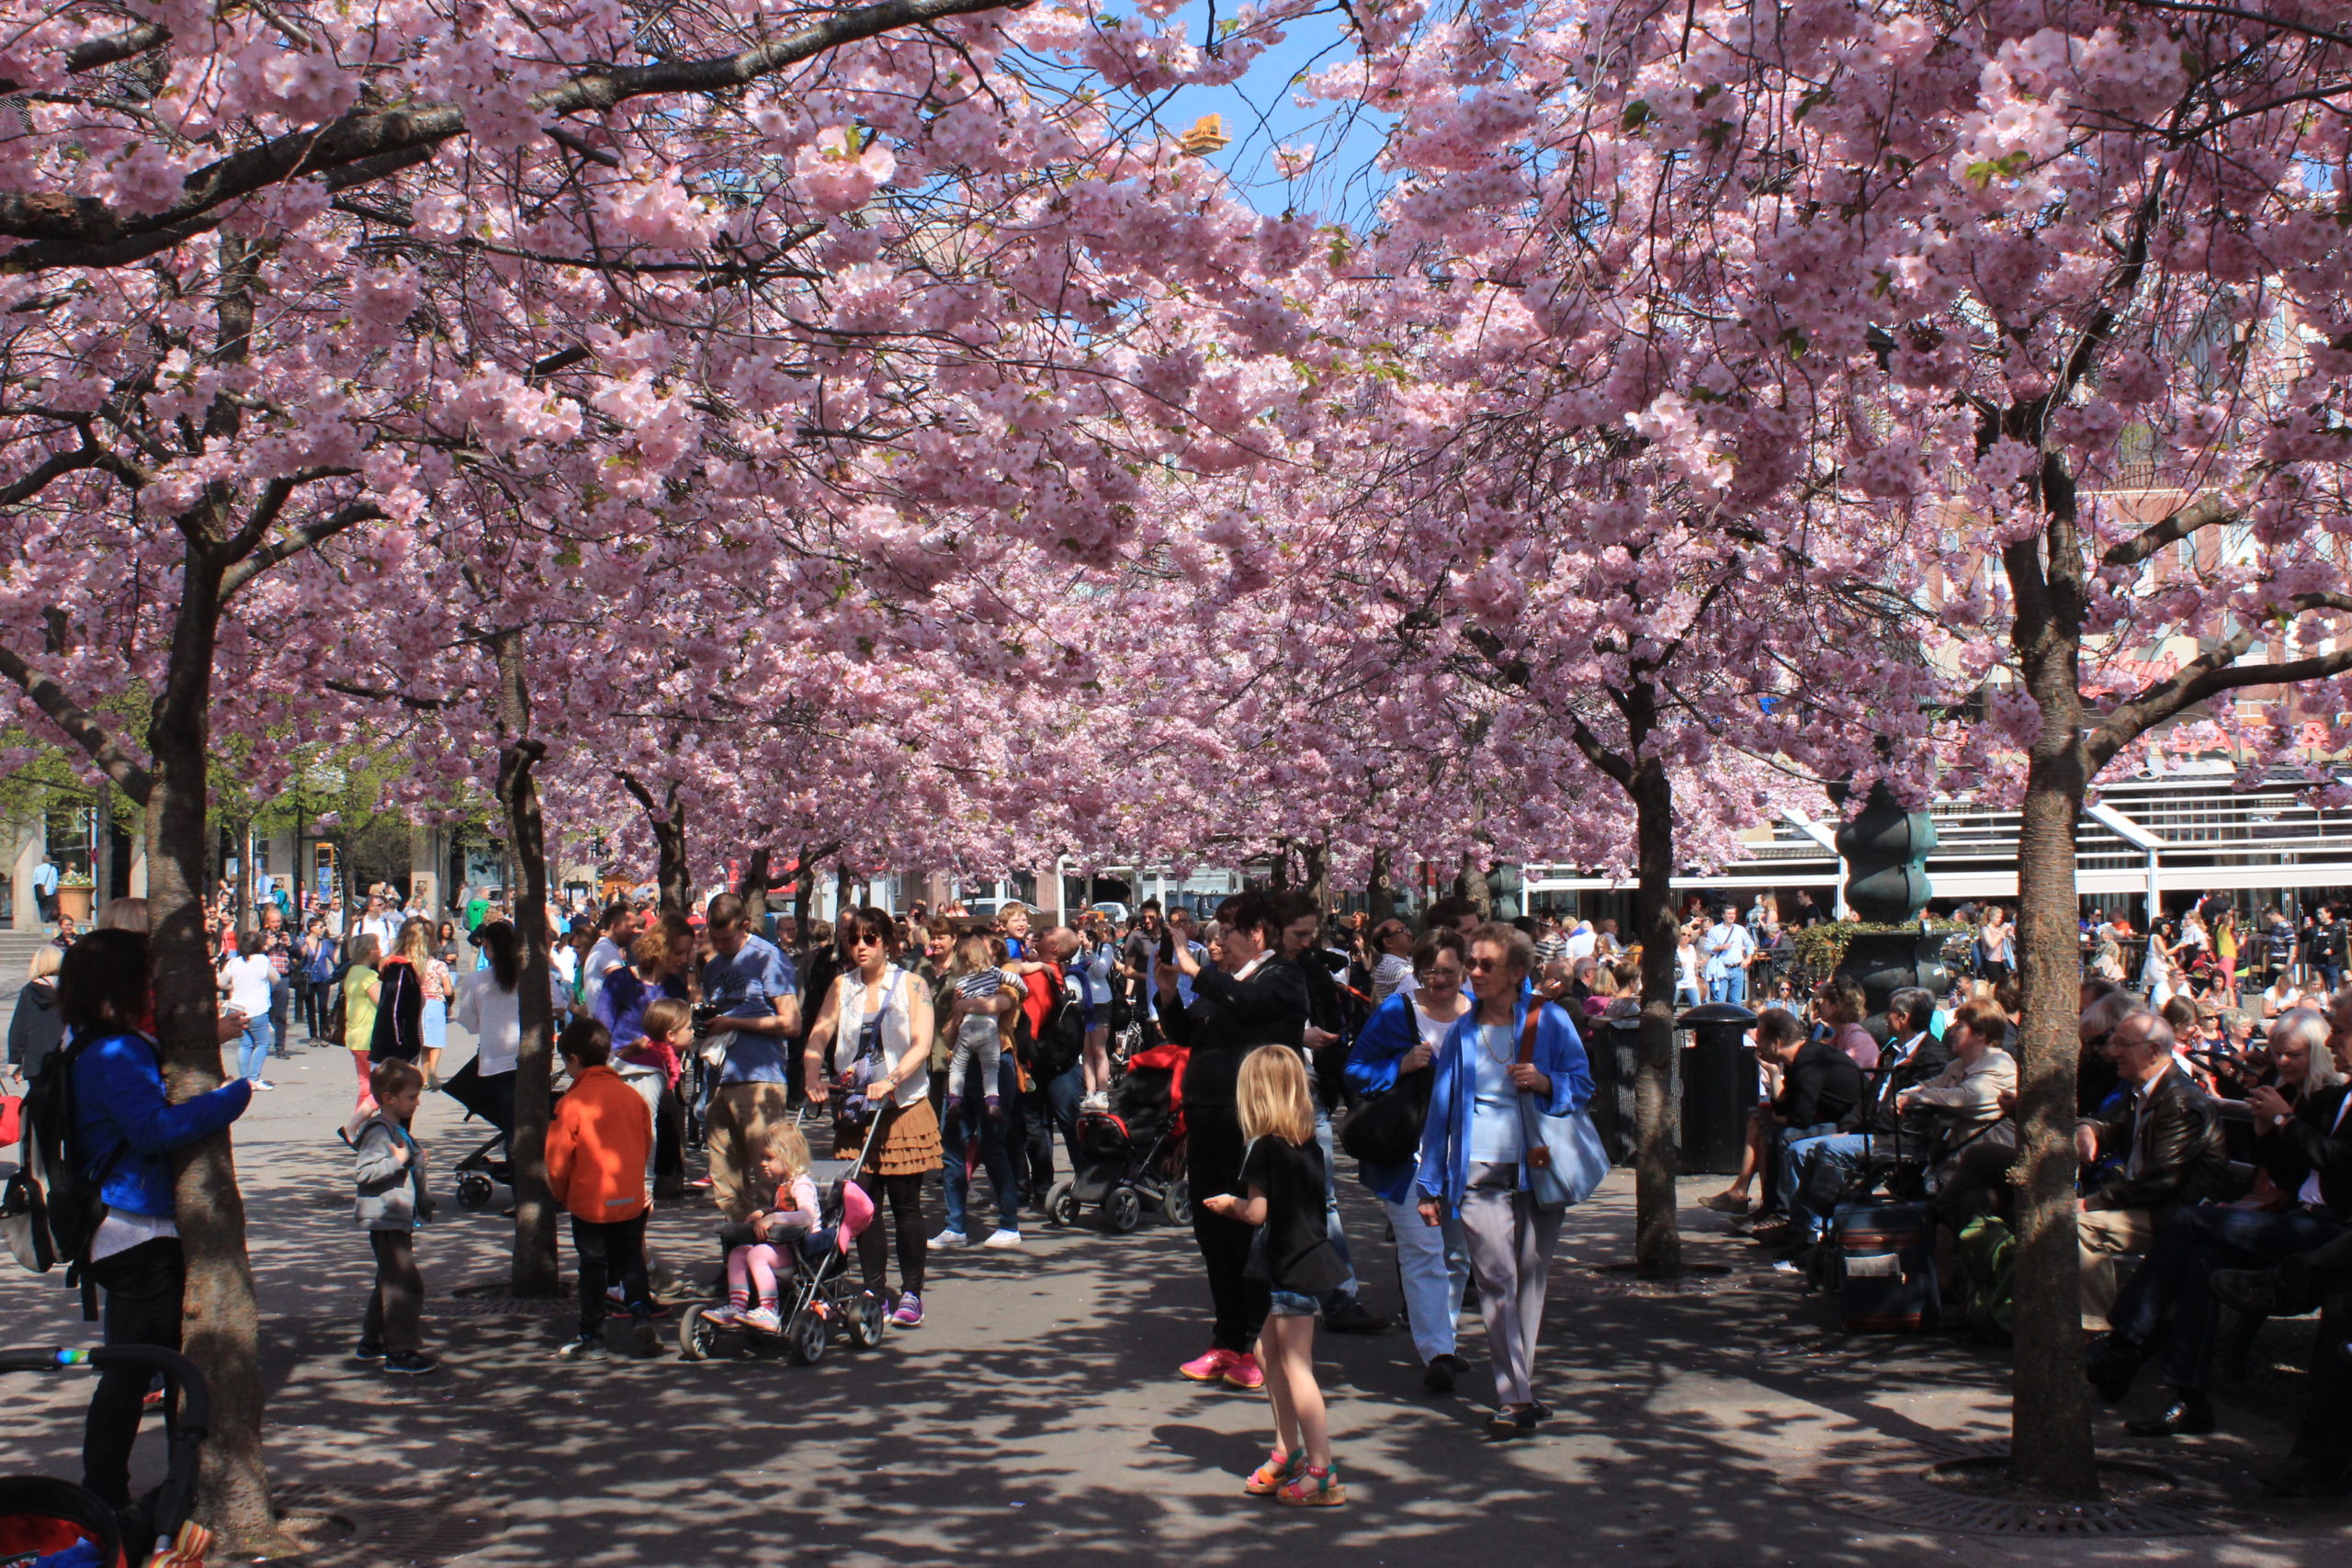 Cherry blossoms in Stockholm